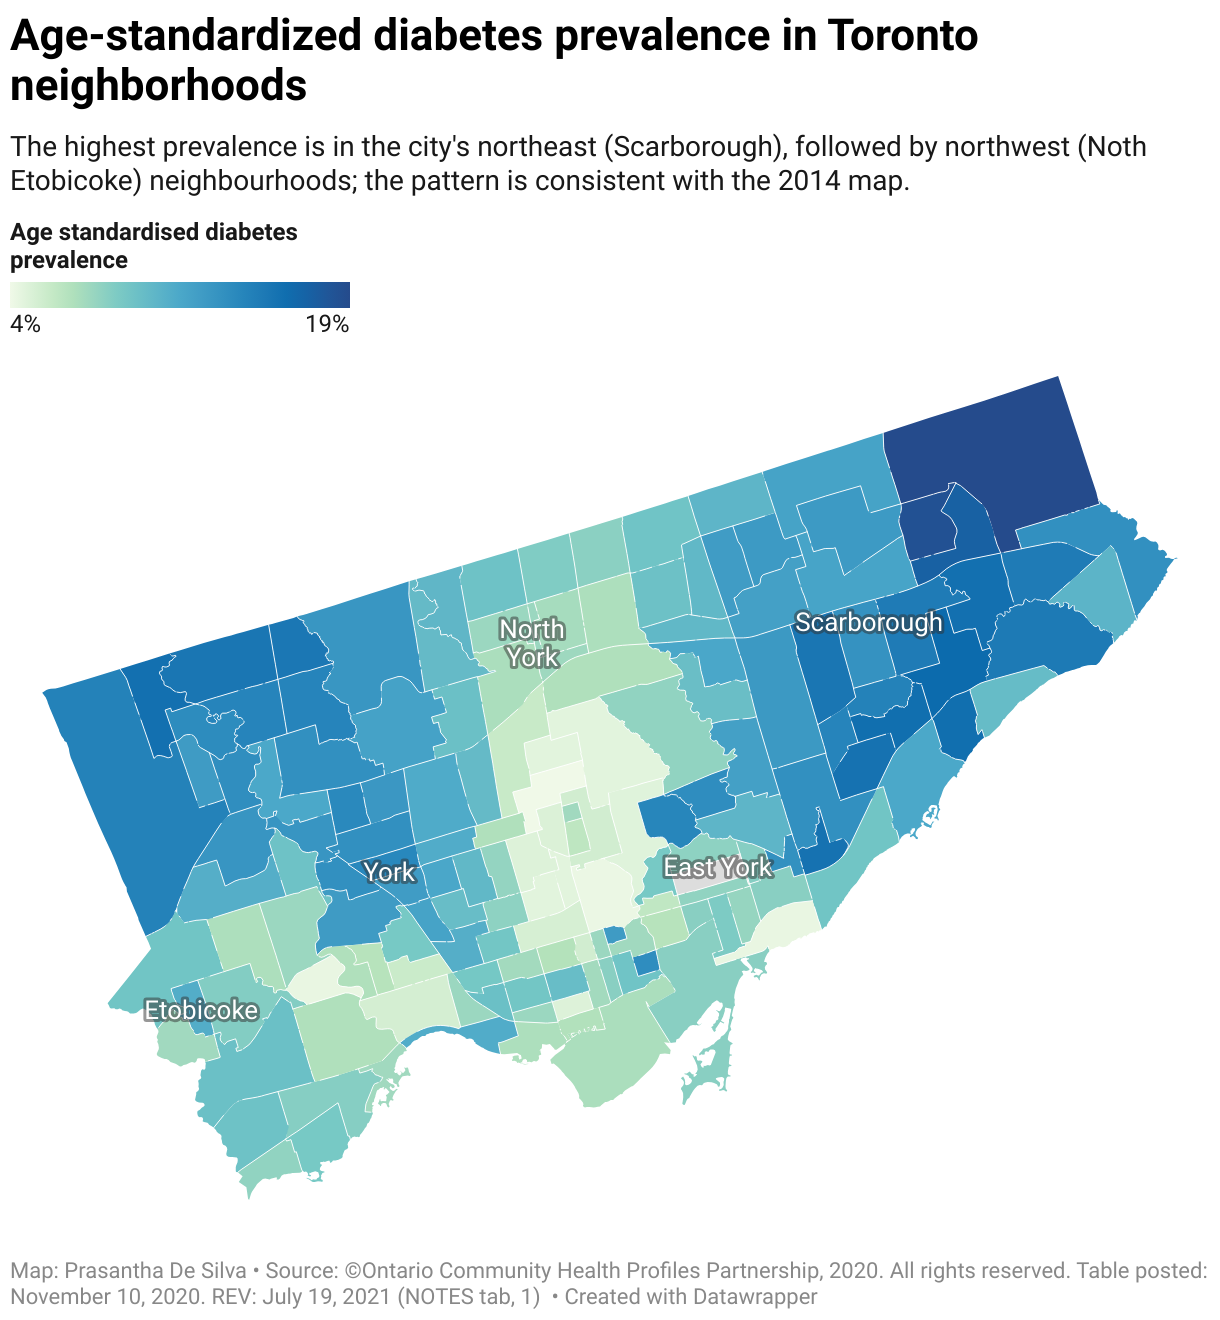 The map details age-standardized diabetes prevalence in Toronto neighbourhoods. 